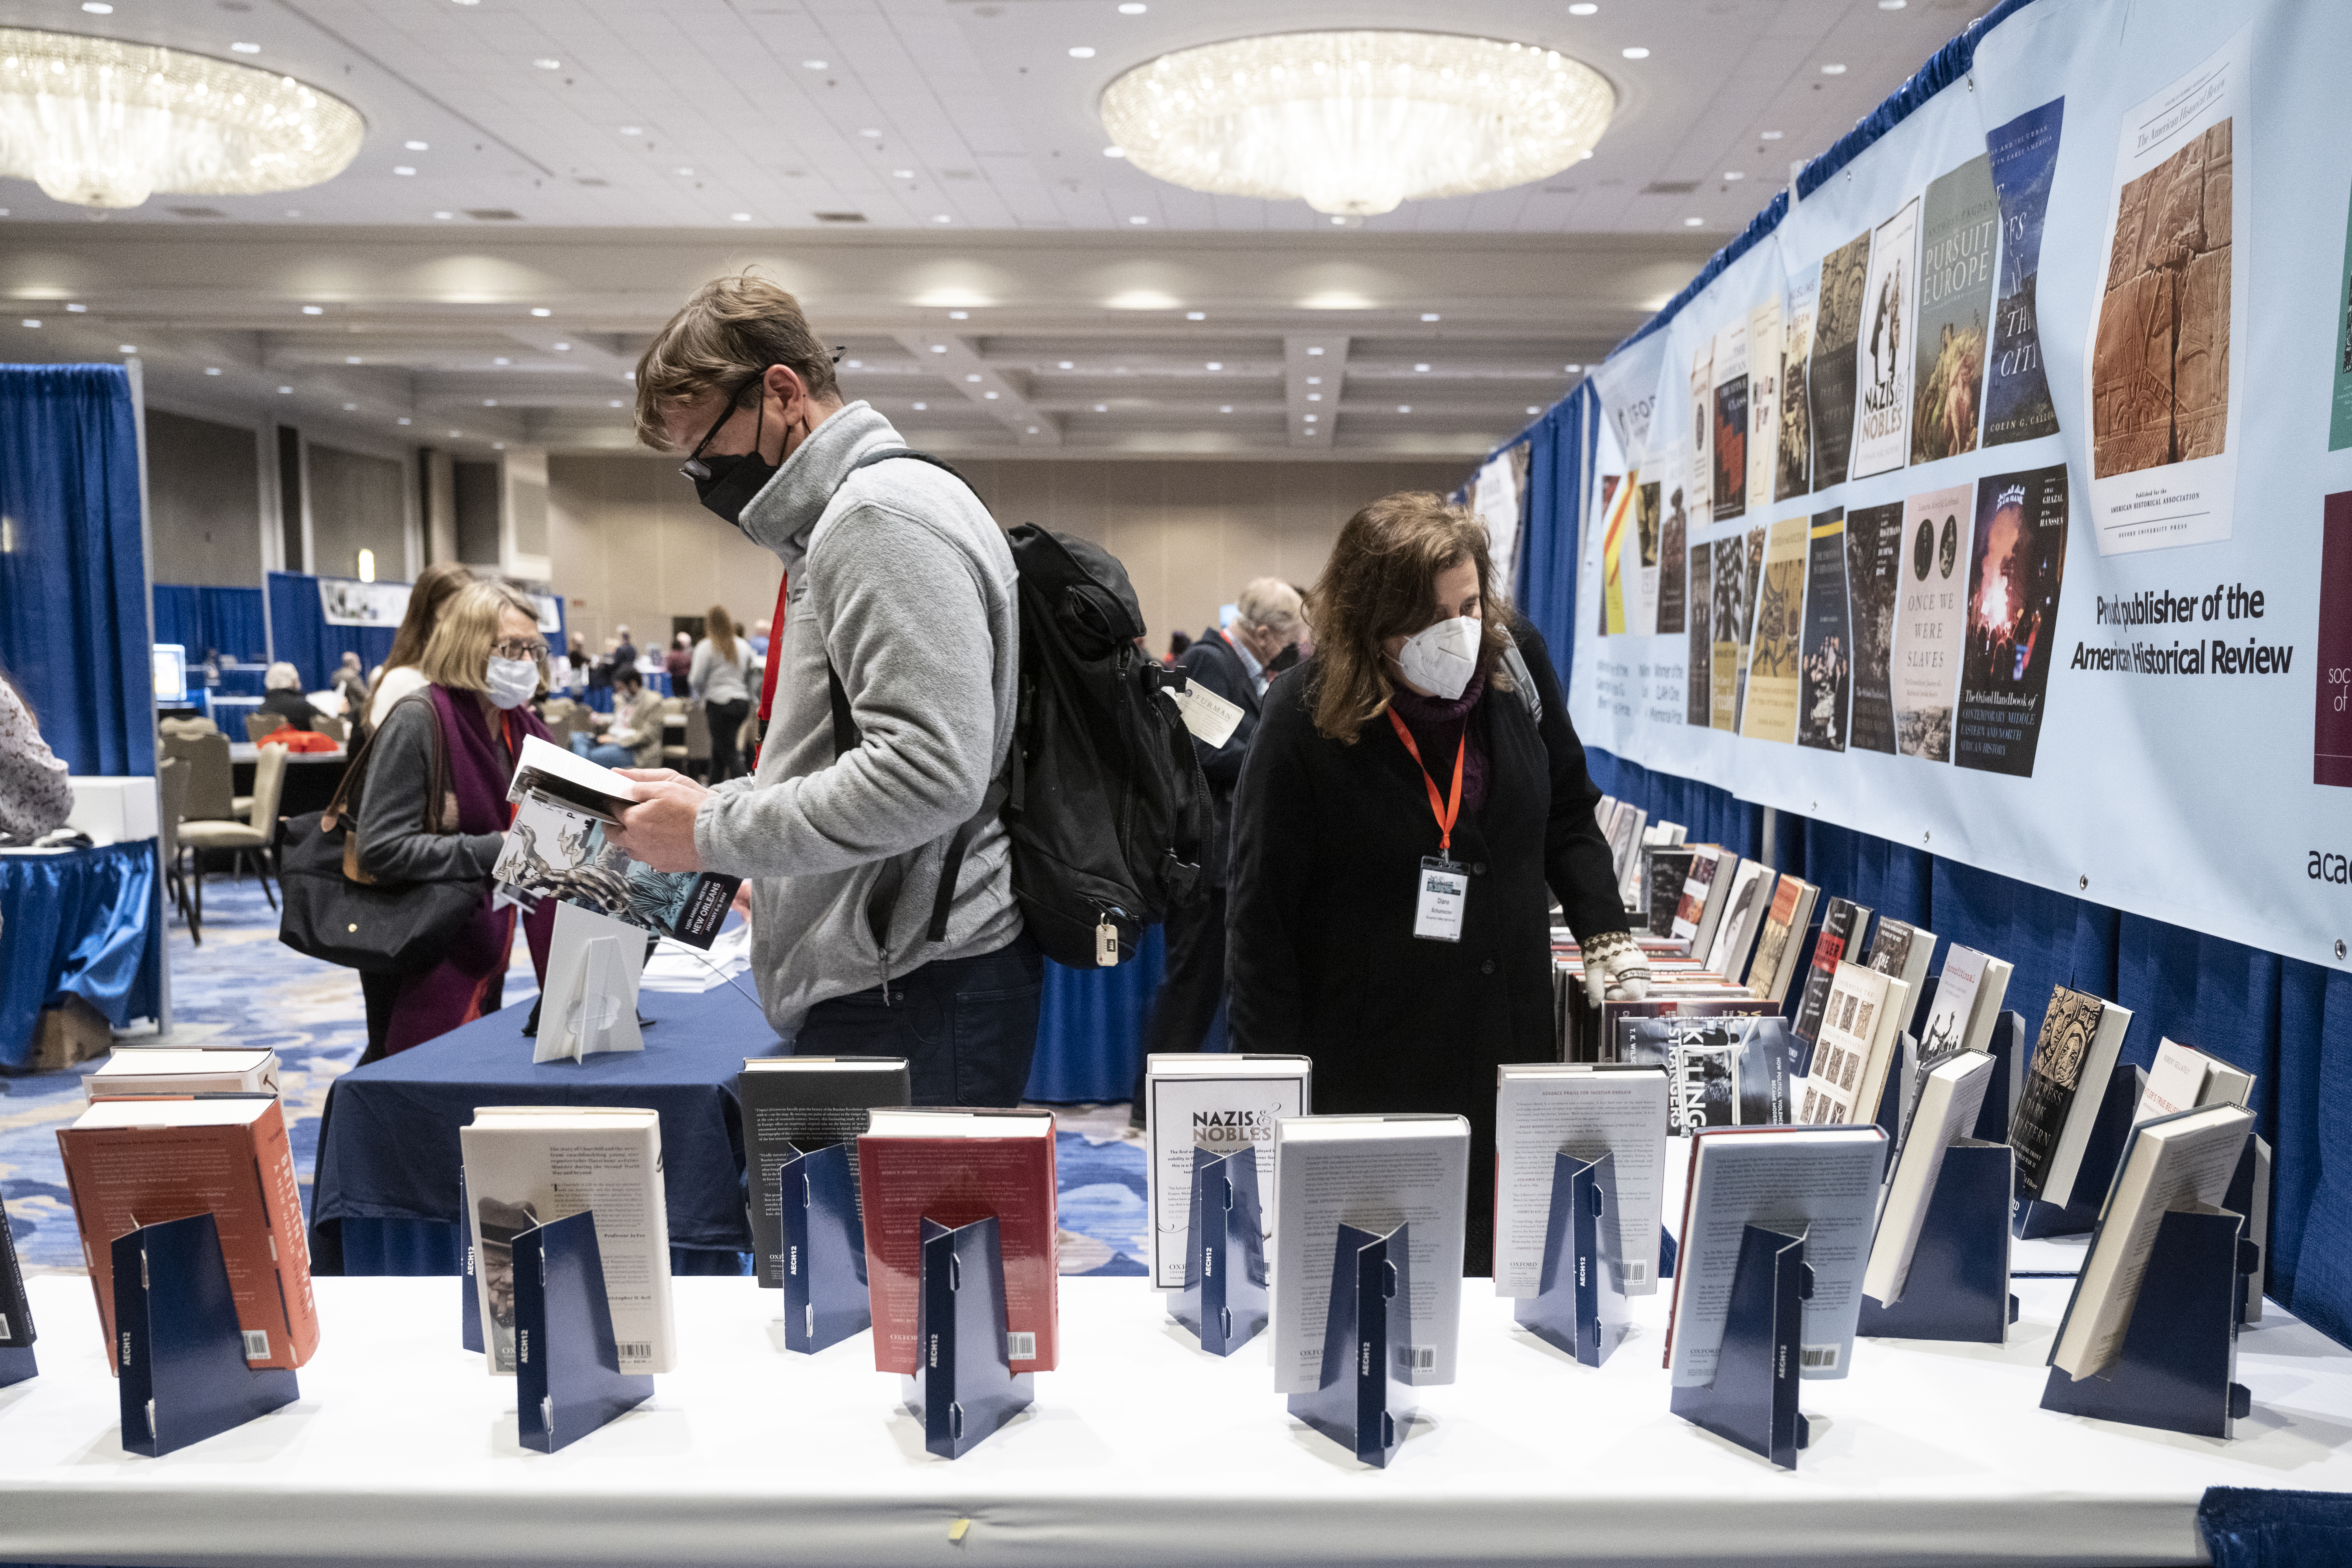 An exhibit hall booth at the AHA22 annual meeting, there are long tables with books on display and conference attendees looking at and reading the publications.